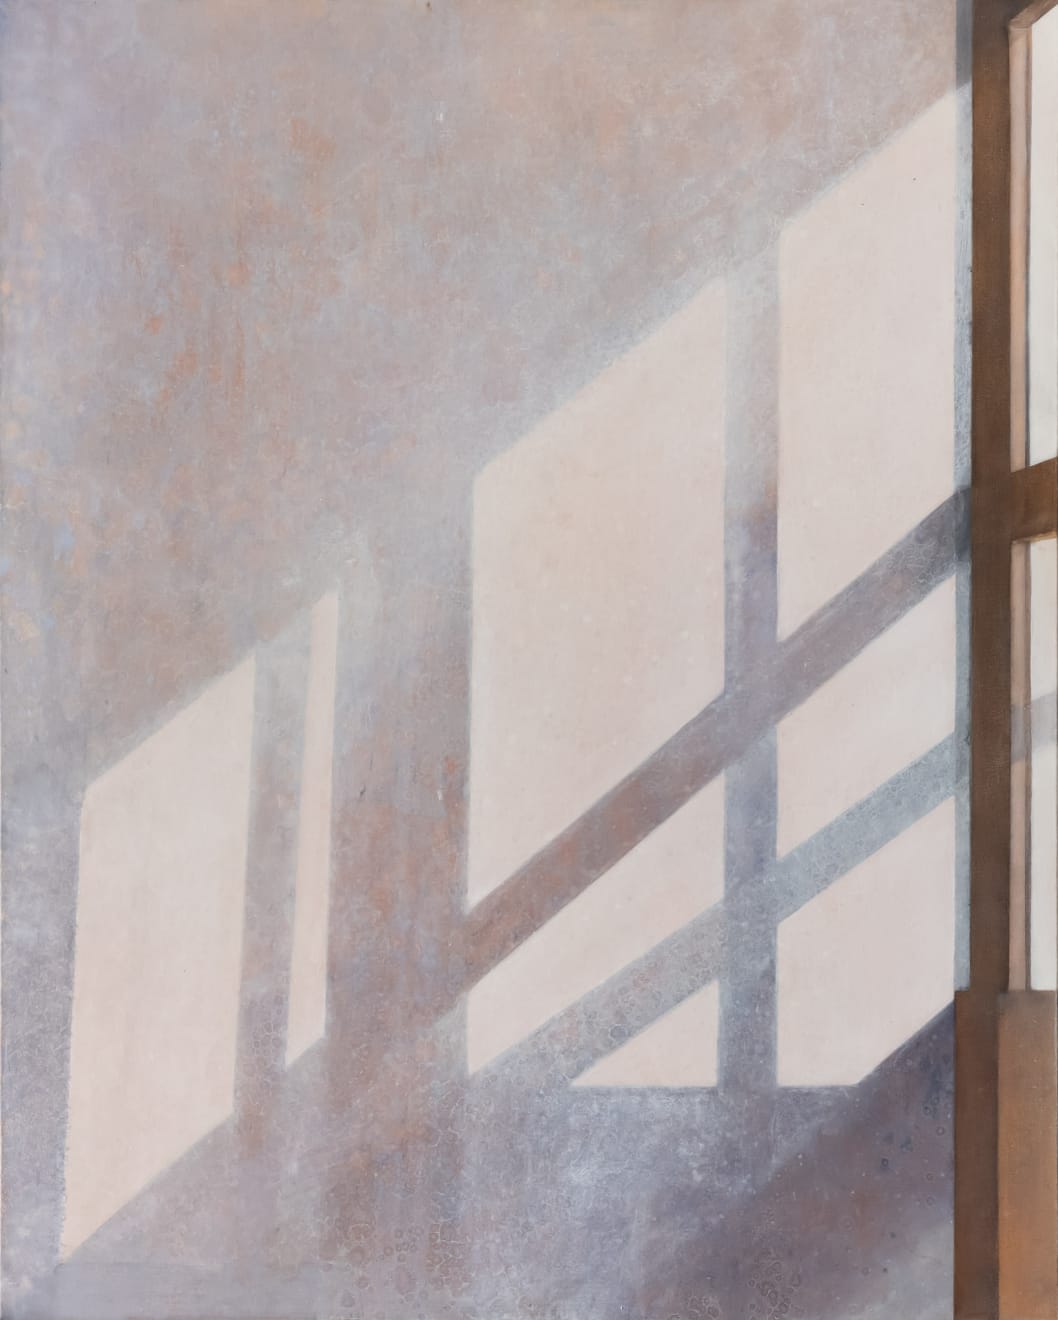 Fenestration II Oil on Canvas Lime-Washed Shadow Box Frame 81.5 x 102cm $5,400 SOLD